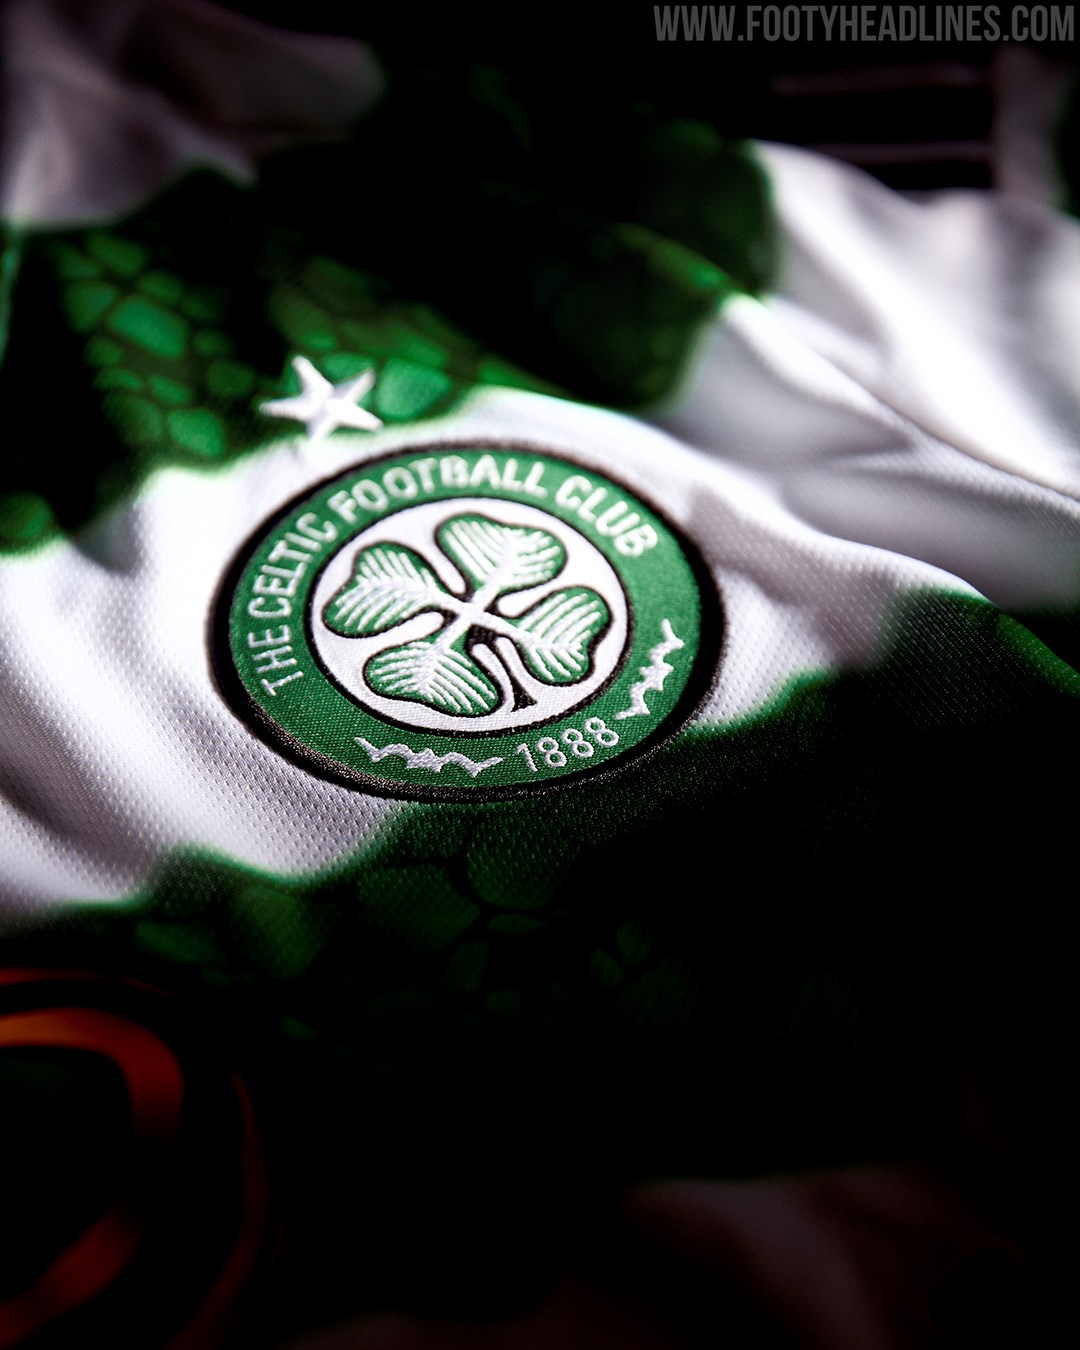 Footy Headlines Confirms Celtic Away Kit For 22/23 – Champions 67